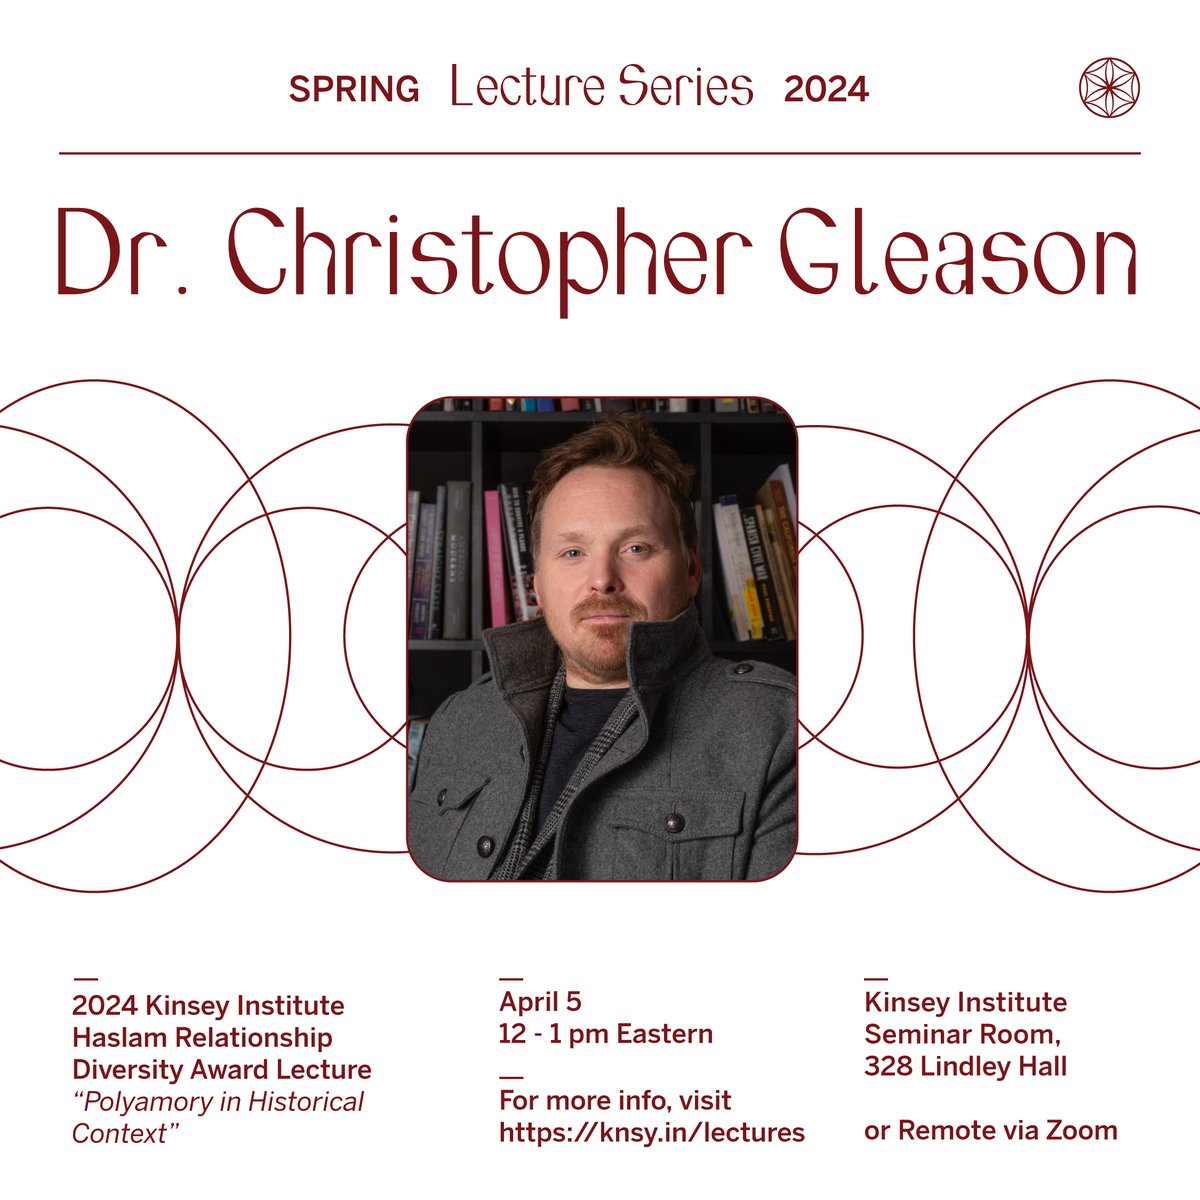 Join us for the 2024 Haslam Relationship Diversity Award Lecture with Dr. Christopher Gleason this Thursday, April 5th at 12pm! He will give a lecture on 'Polyamory in Historical Context', drawn from his new book. Register for the Zoom webinar here: knsy.in/Haslam2024